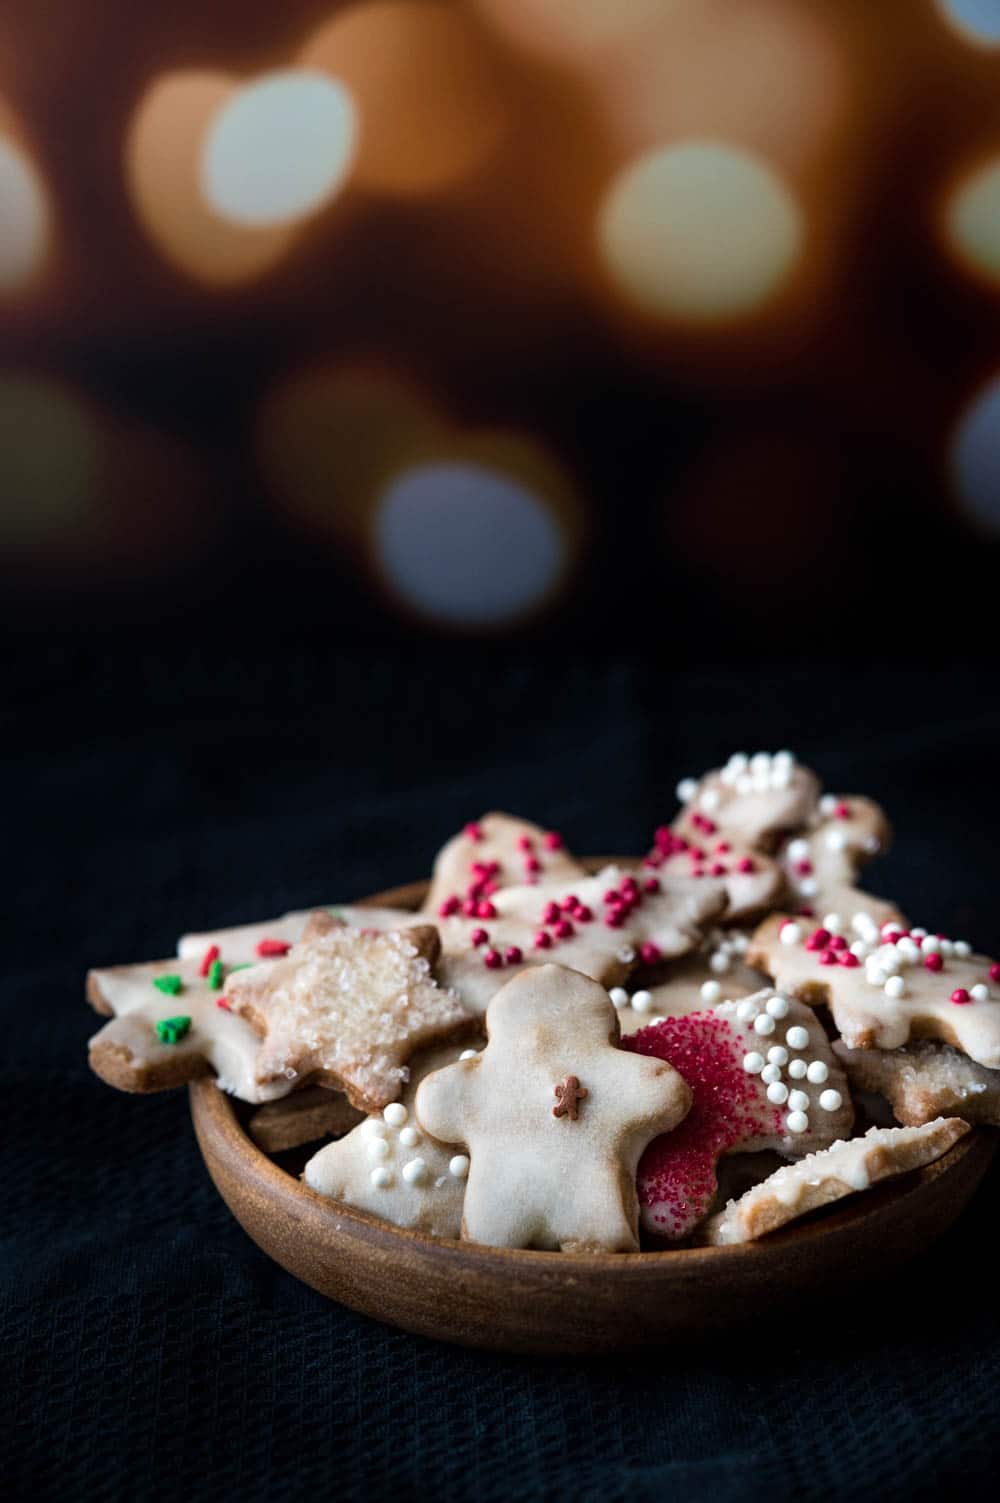 A plate of decorated Christmas cookies with a background of twinkling lights.